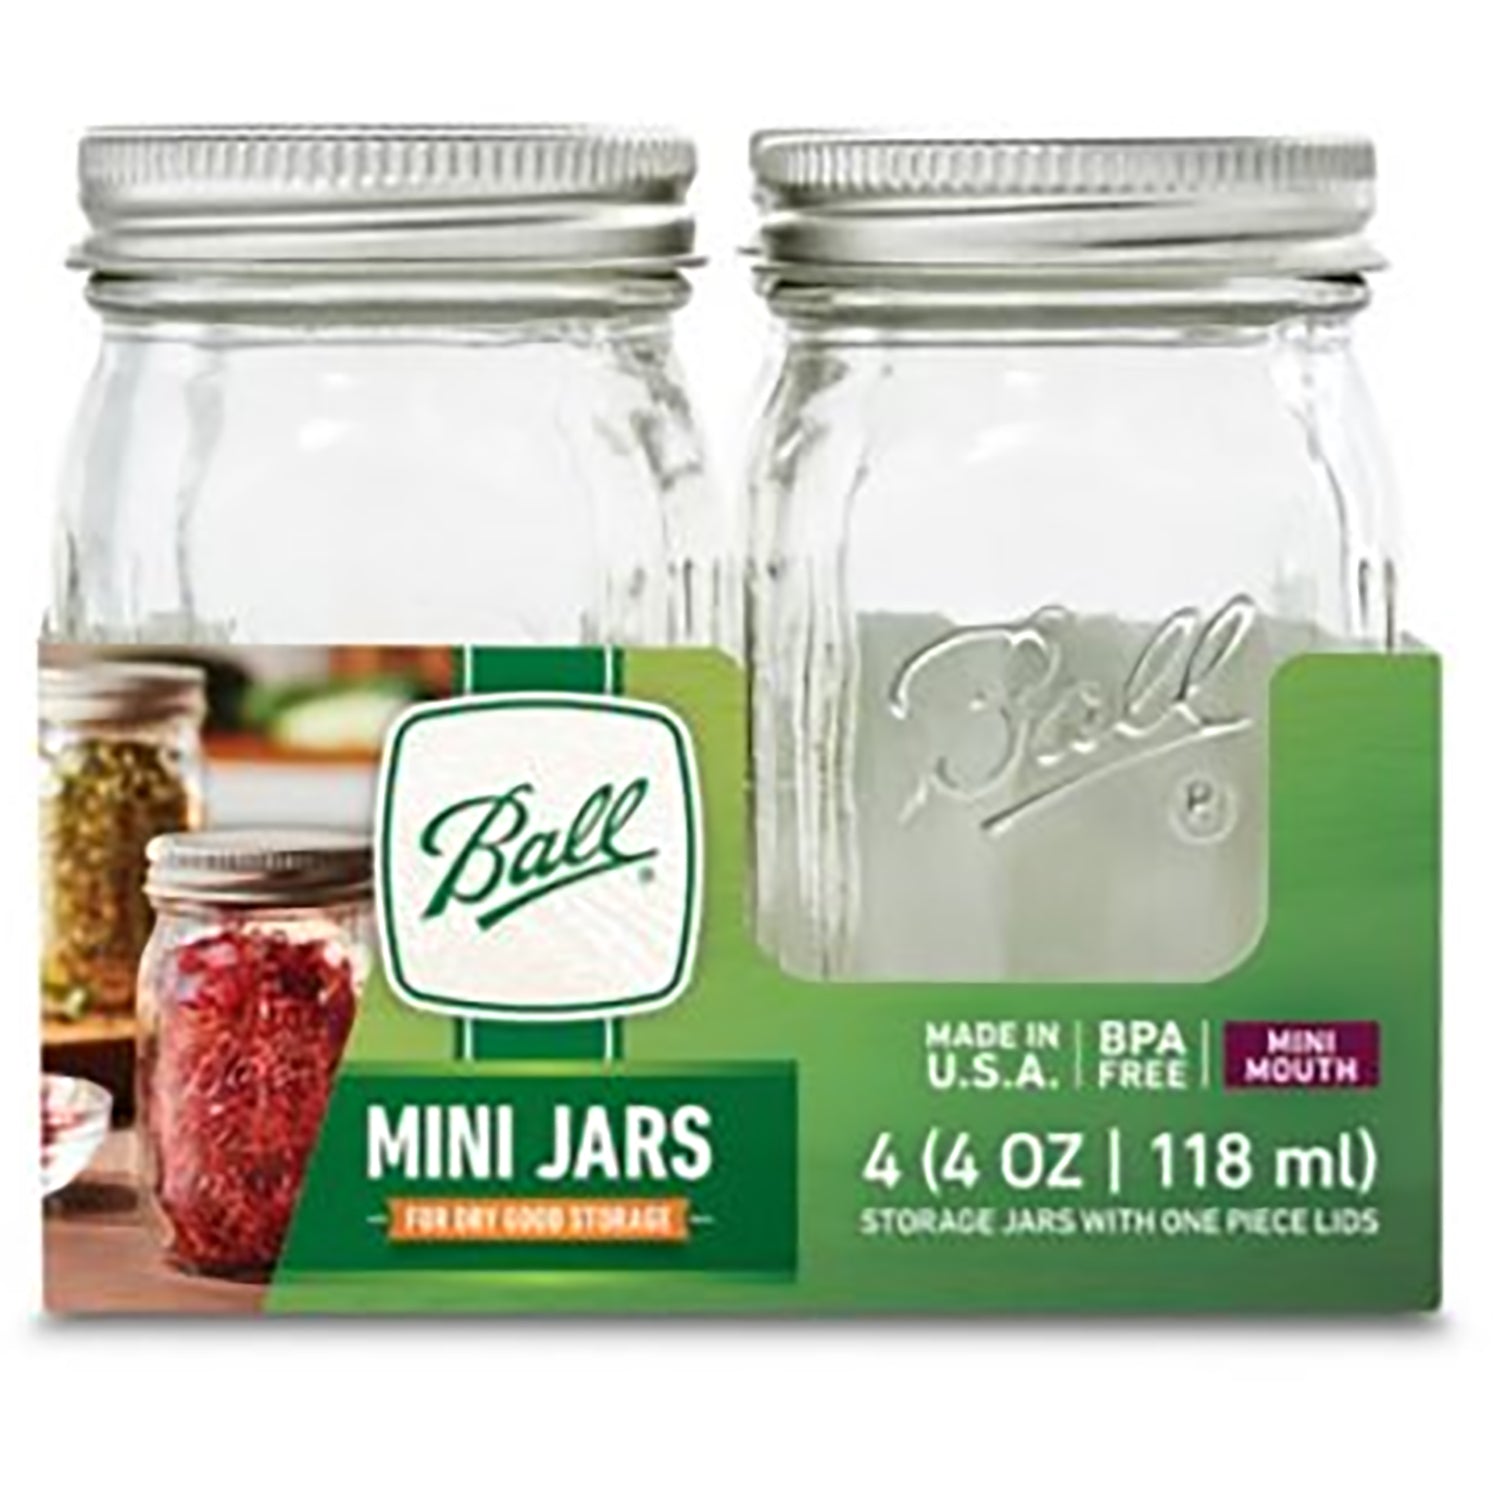 Glass cookie jars for kitchen counter,(3 Pack) 75 oz food storage